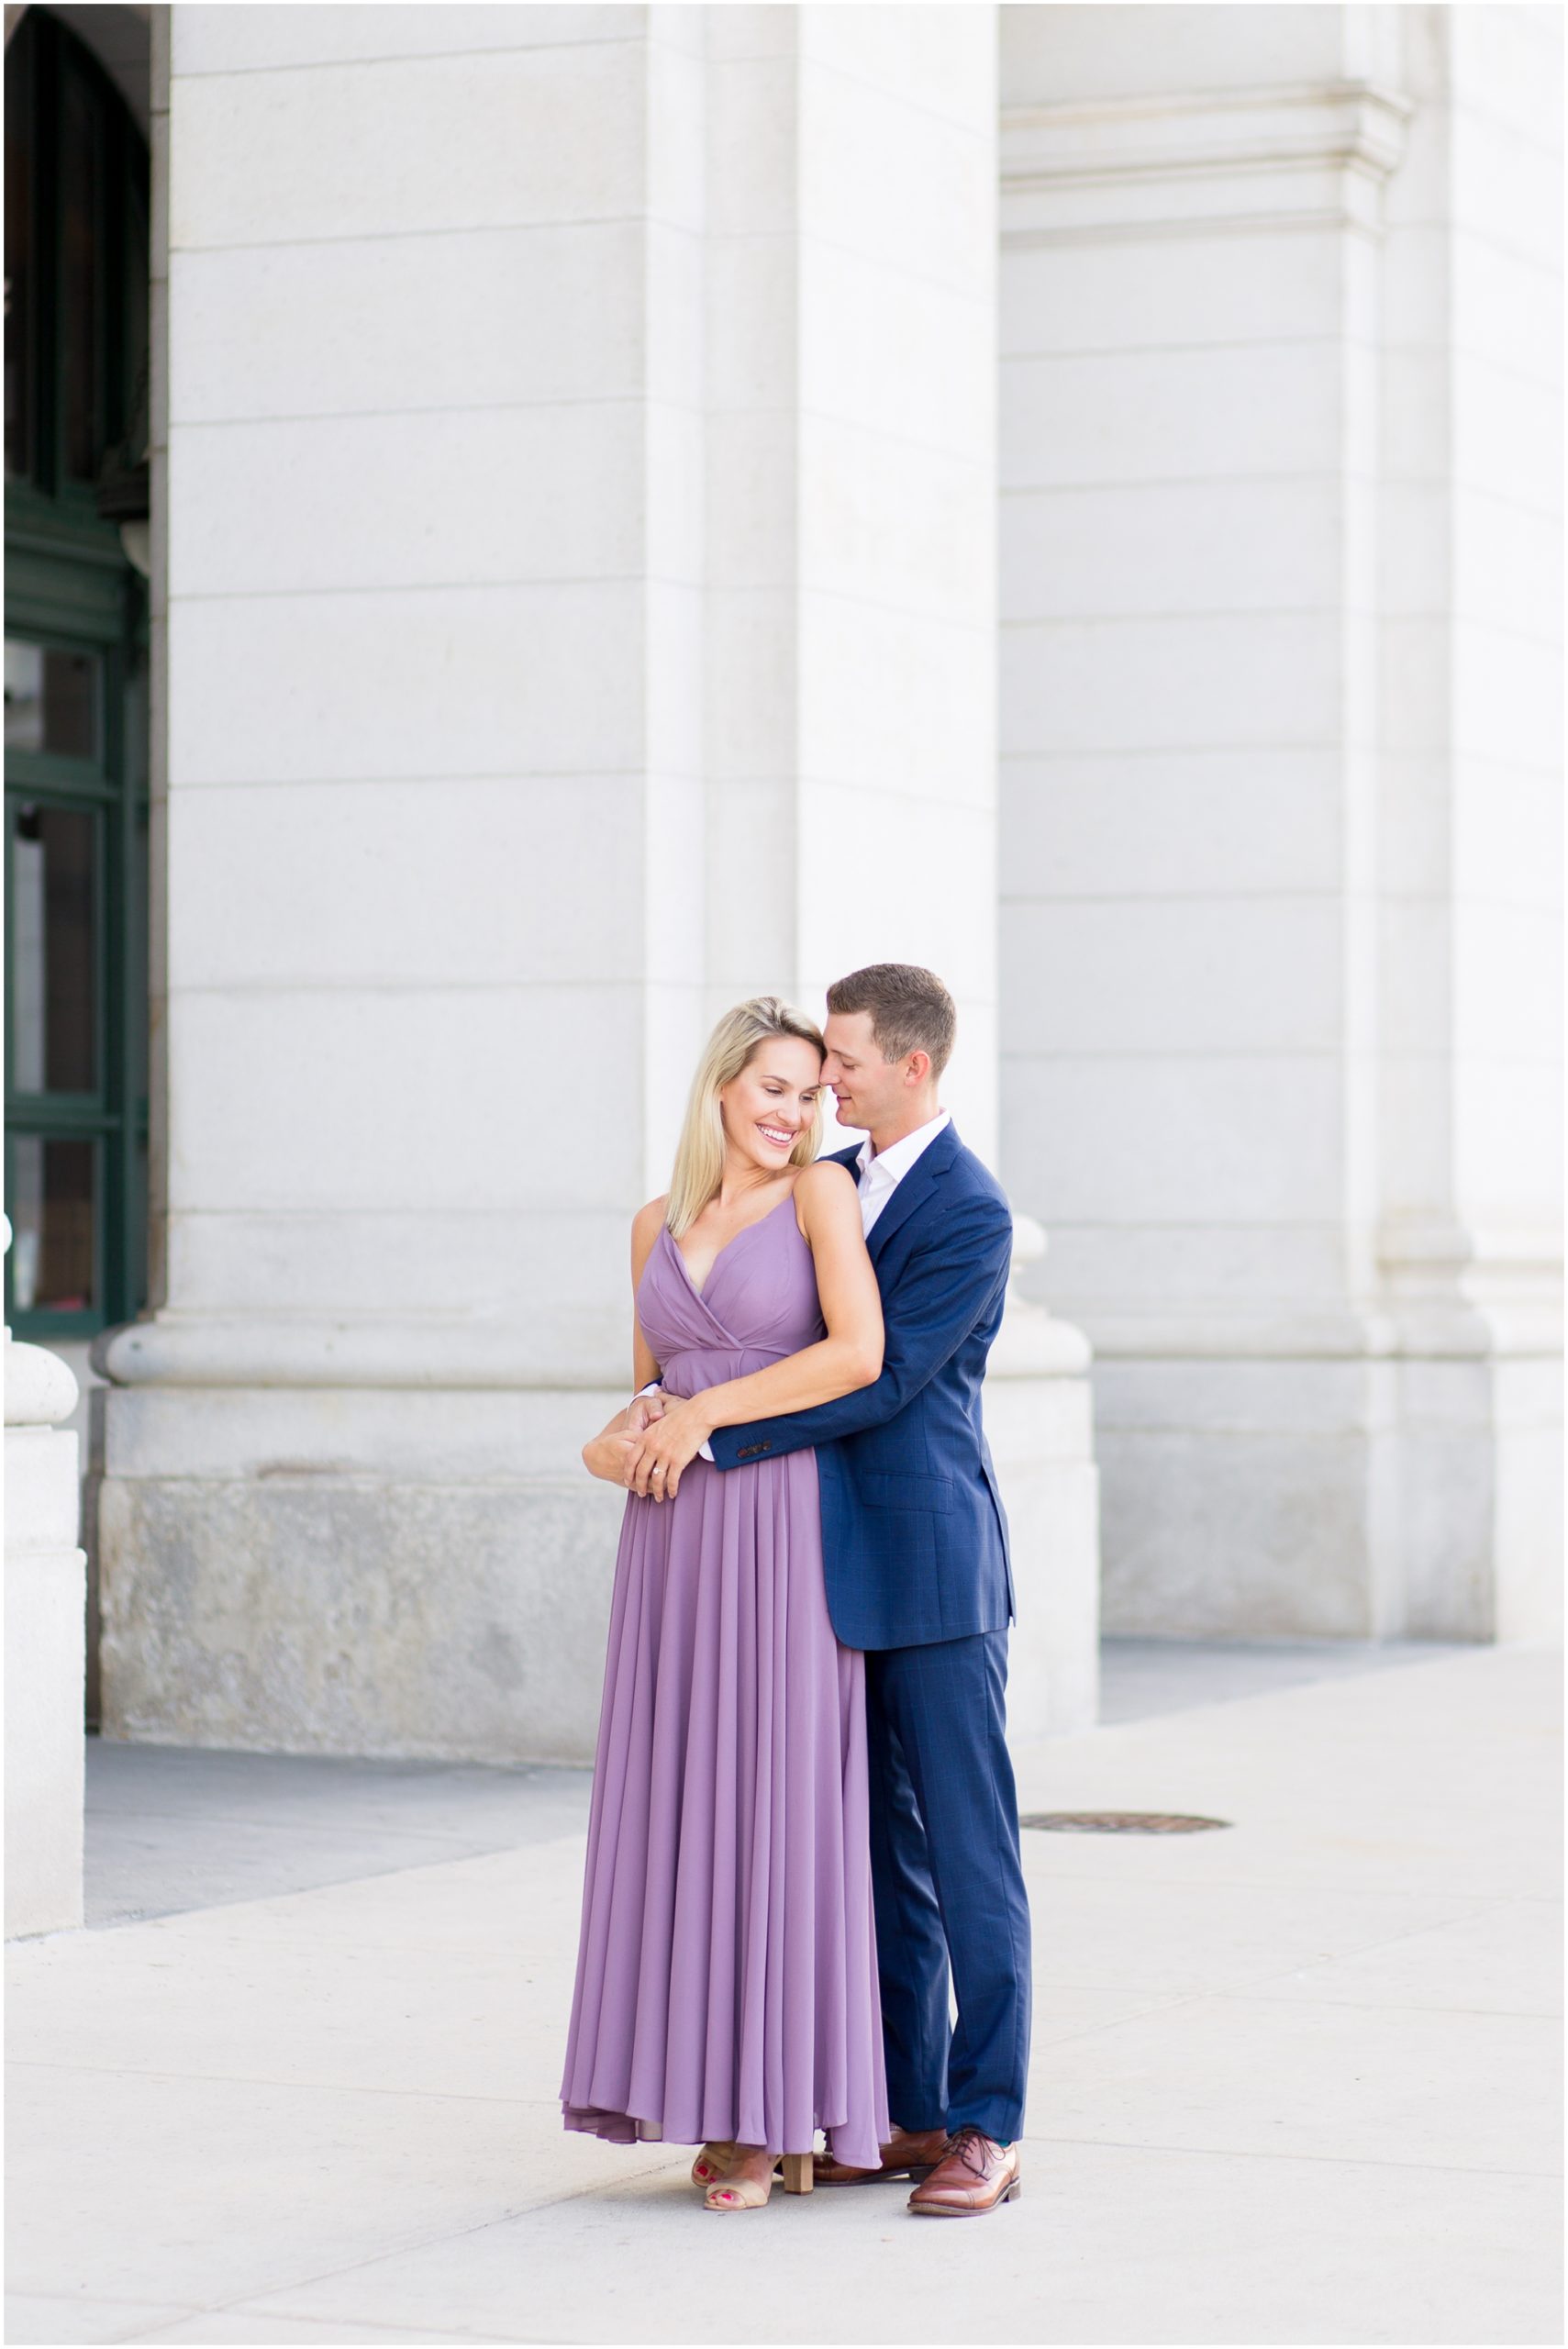 Classy DC engagement session at Union Station wedding venue